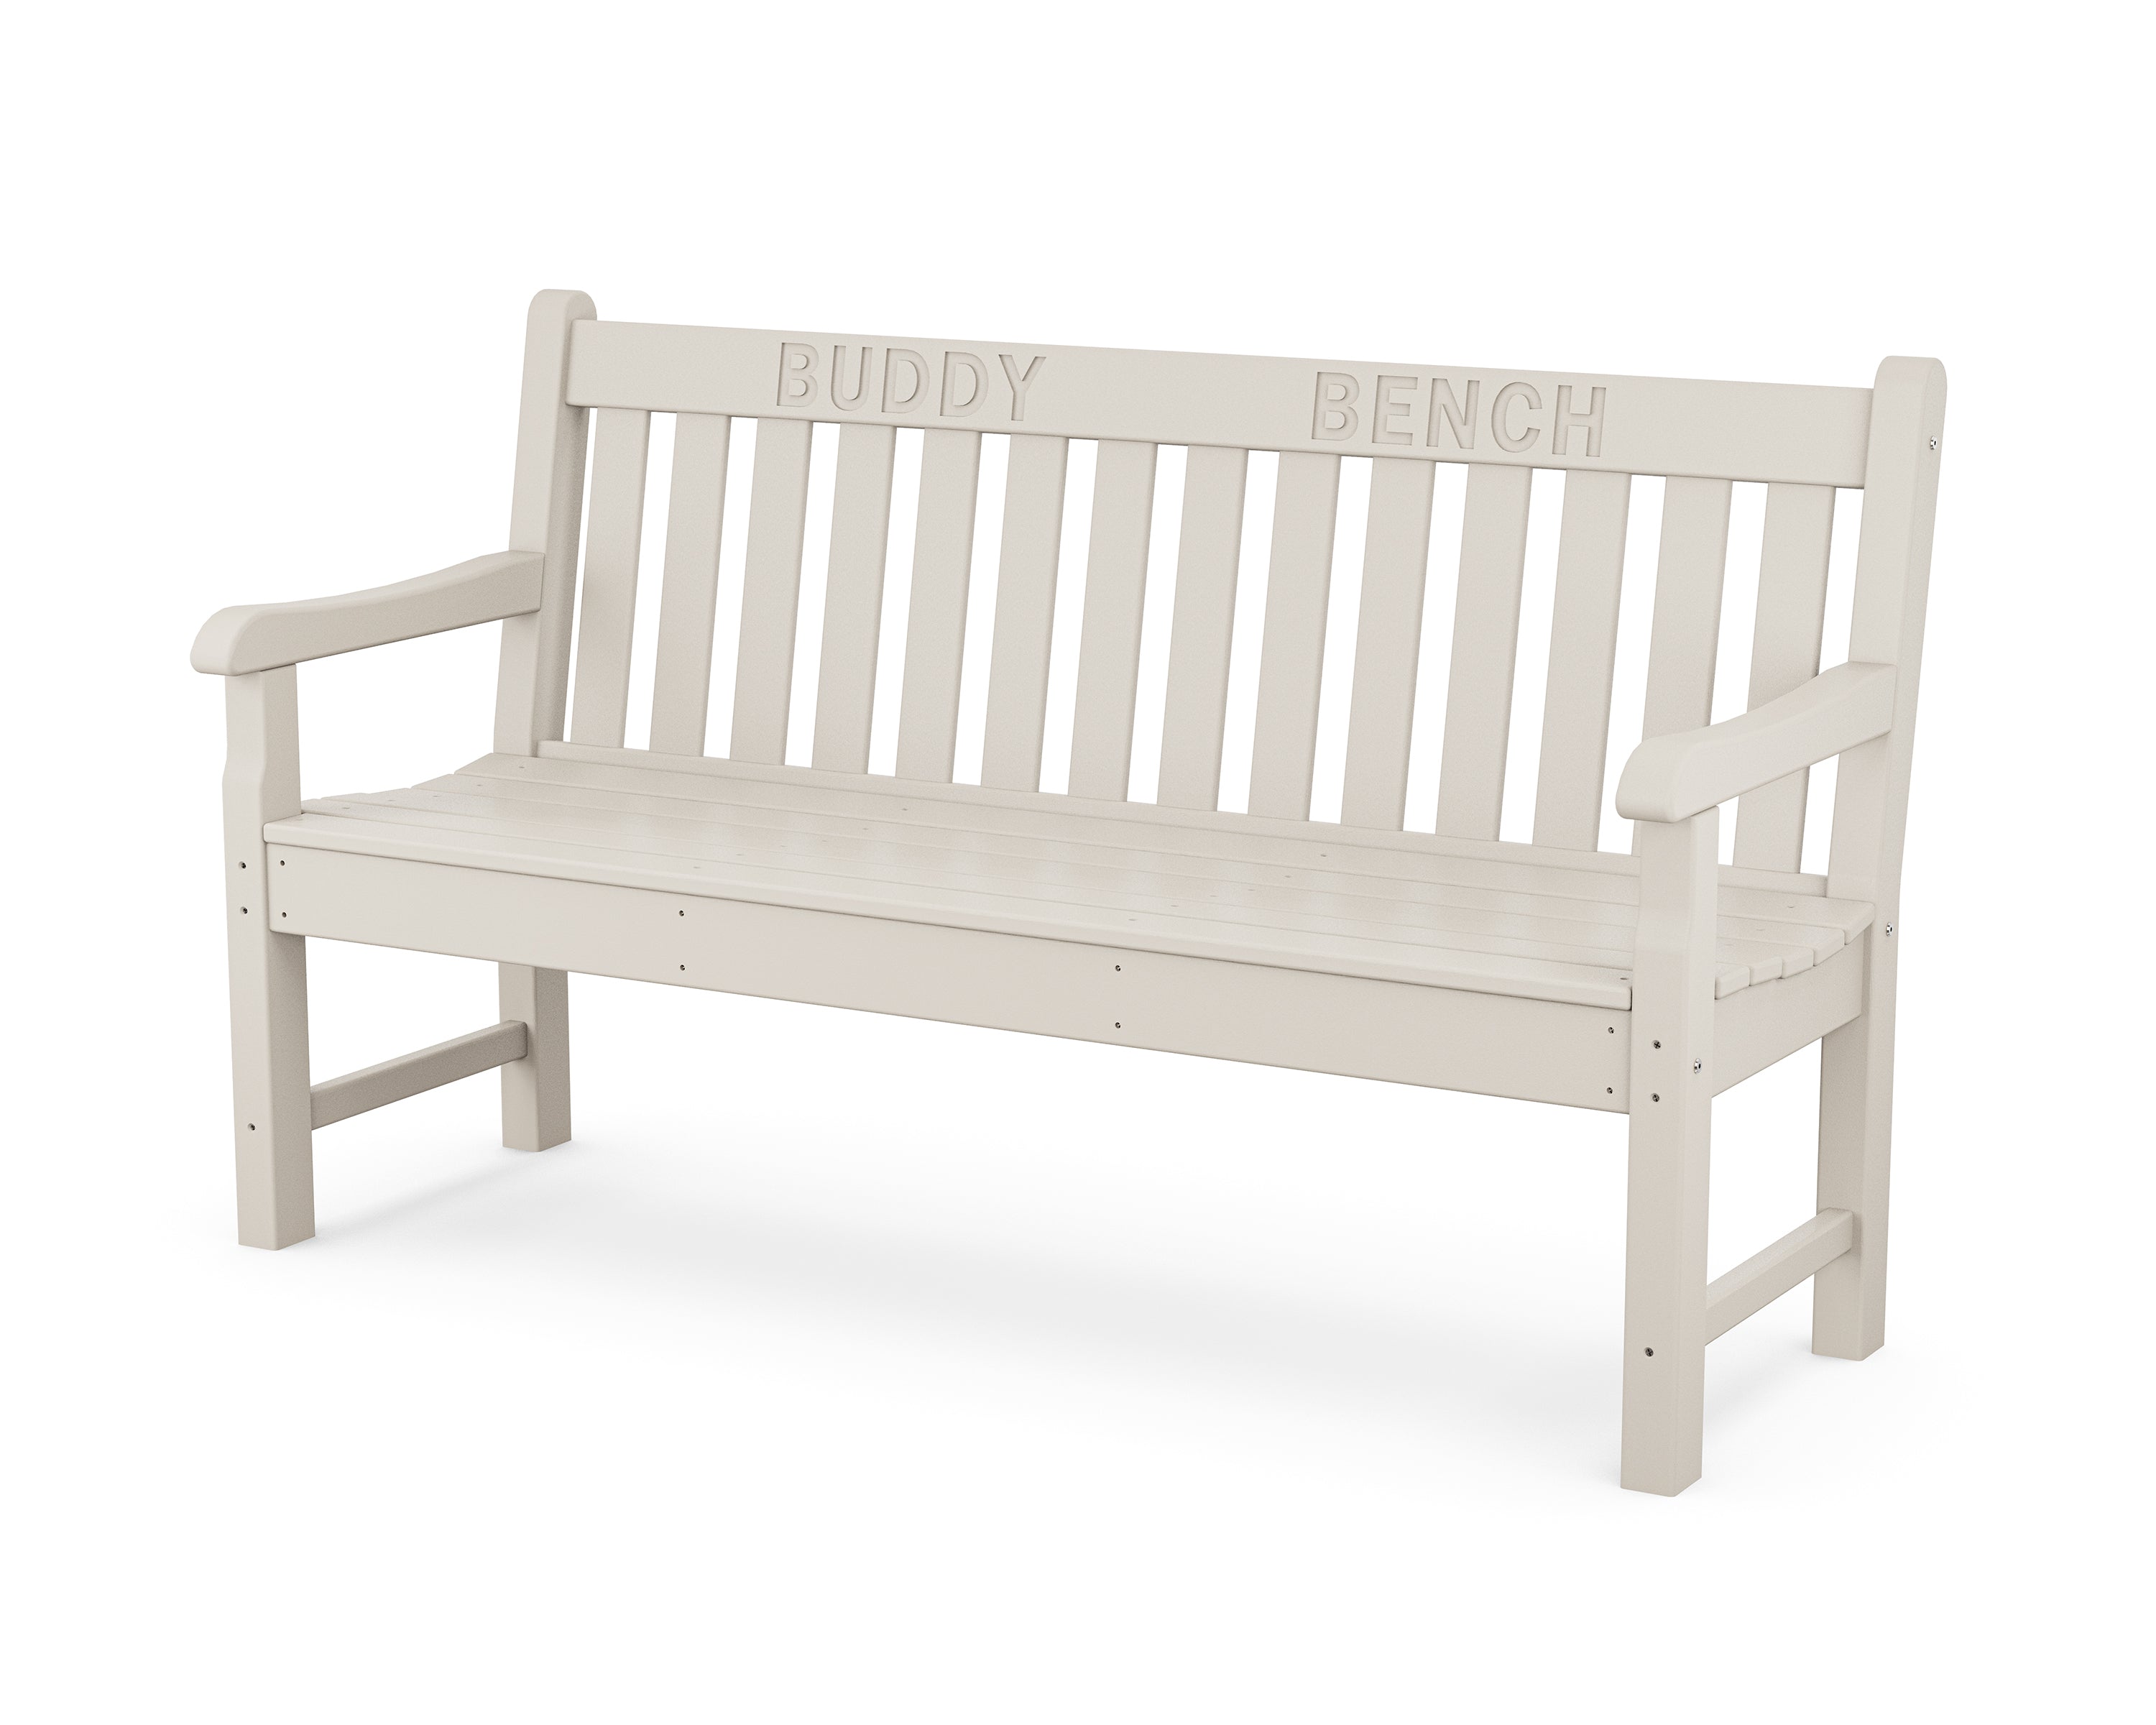 POLYWOOD® 60” Buddy Bench in Sand